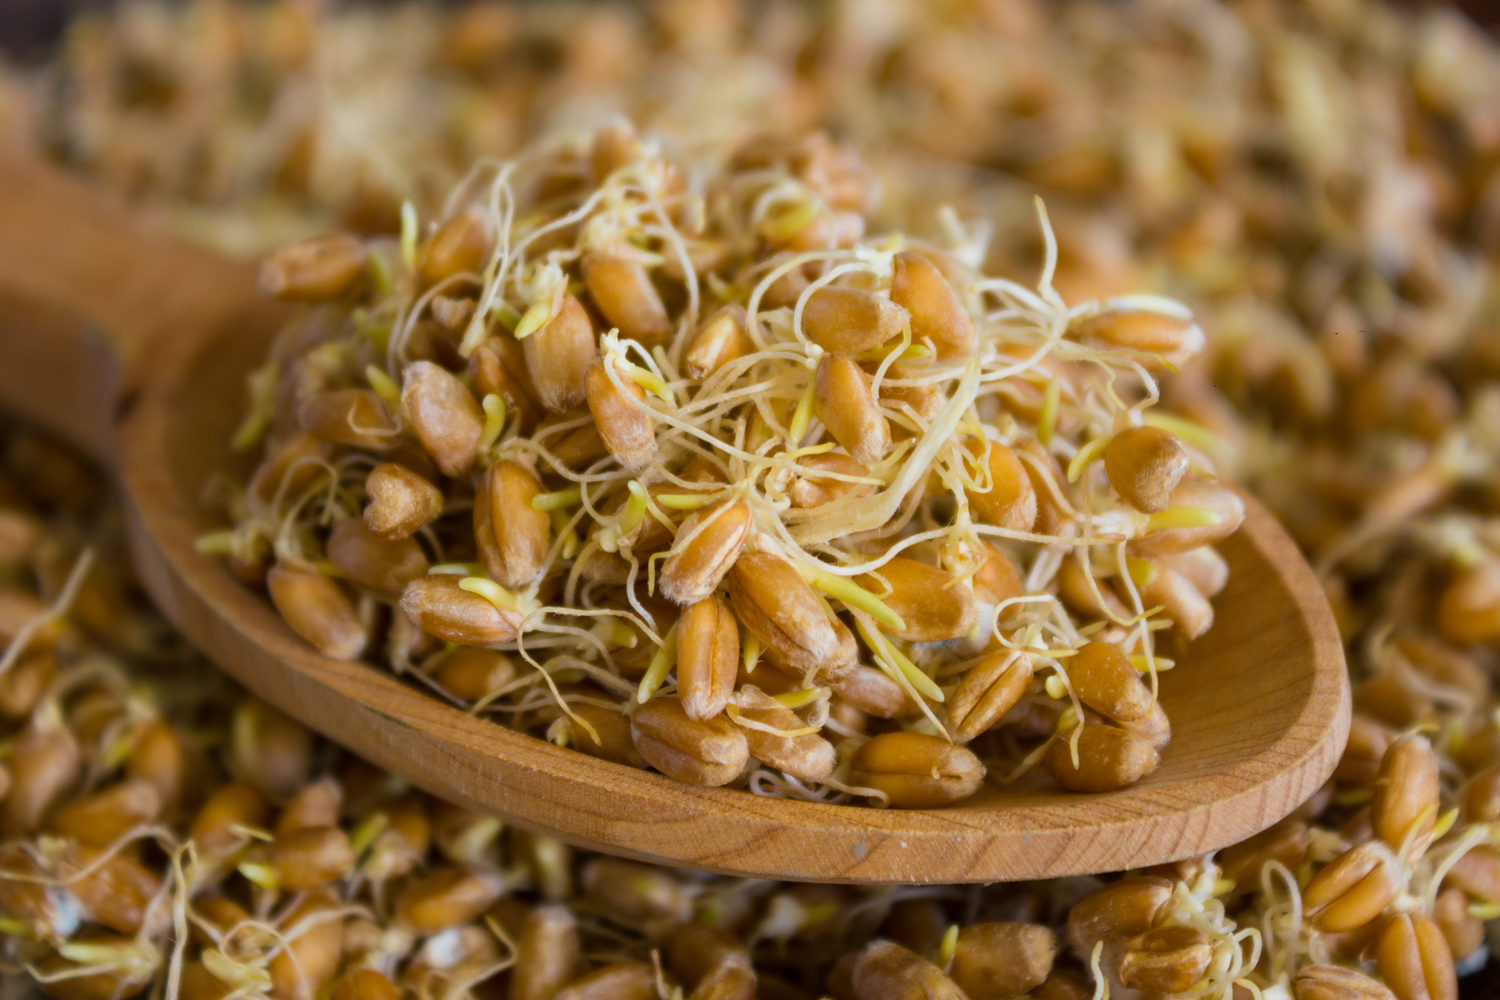 Milling Sprouted Grains: How to Ensure Success